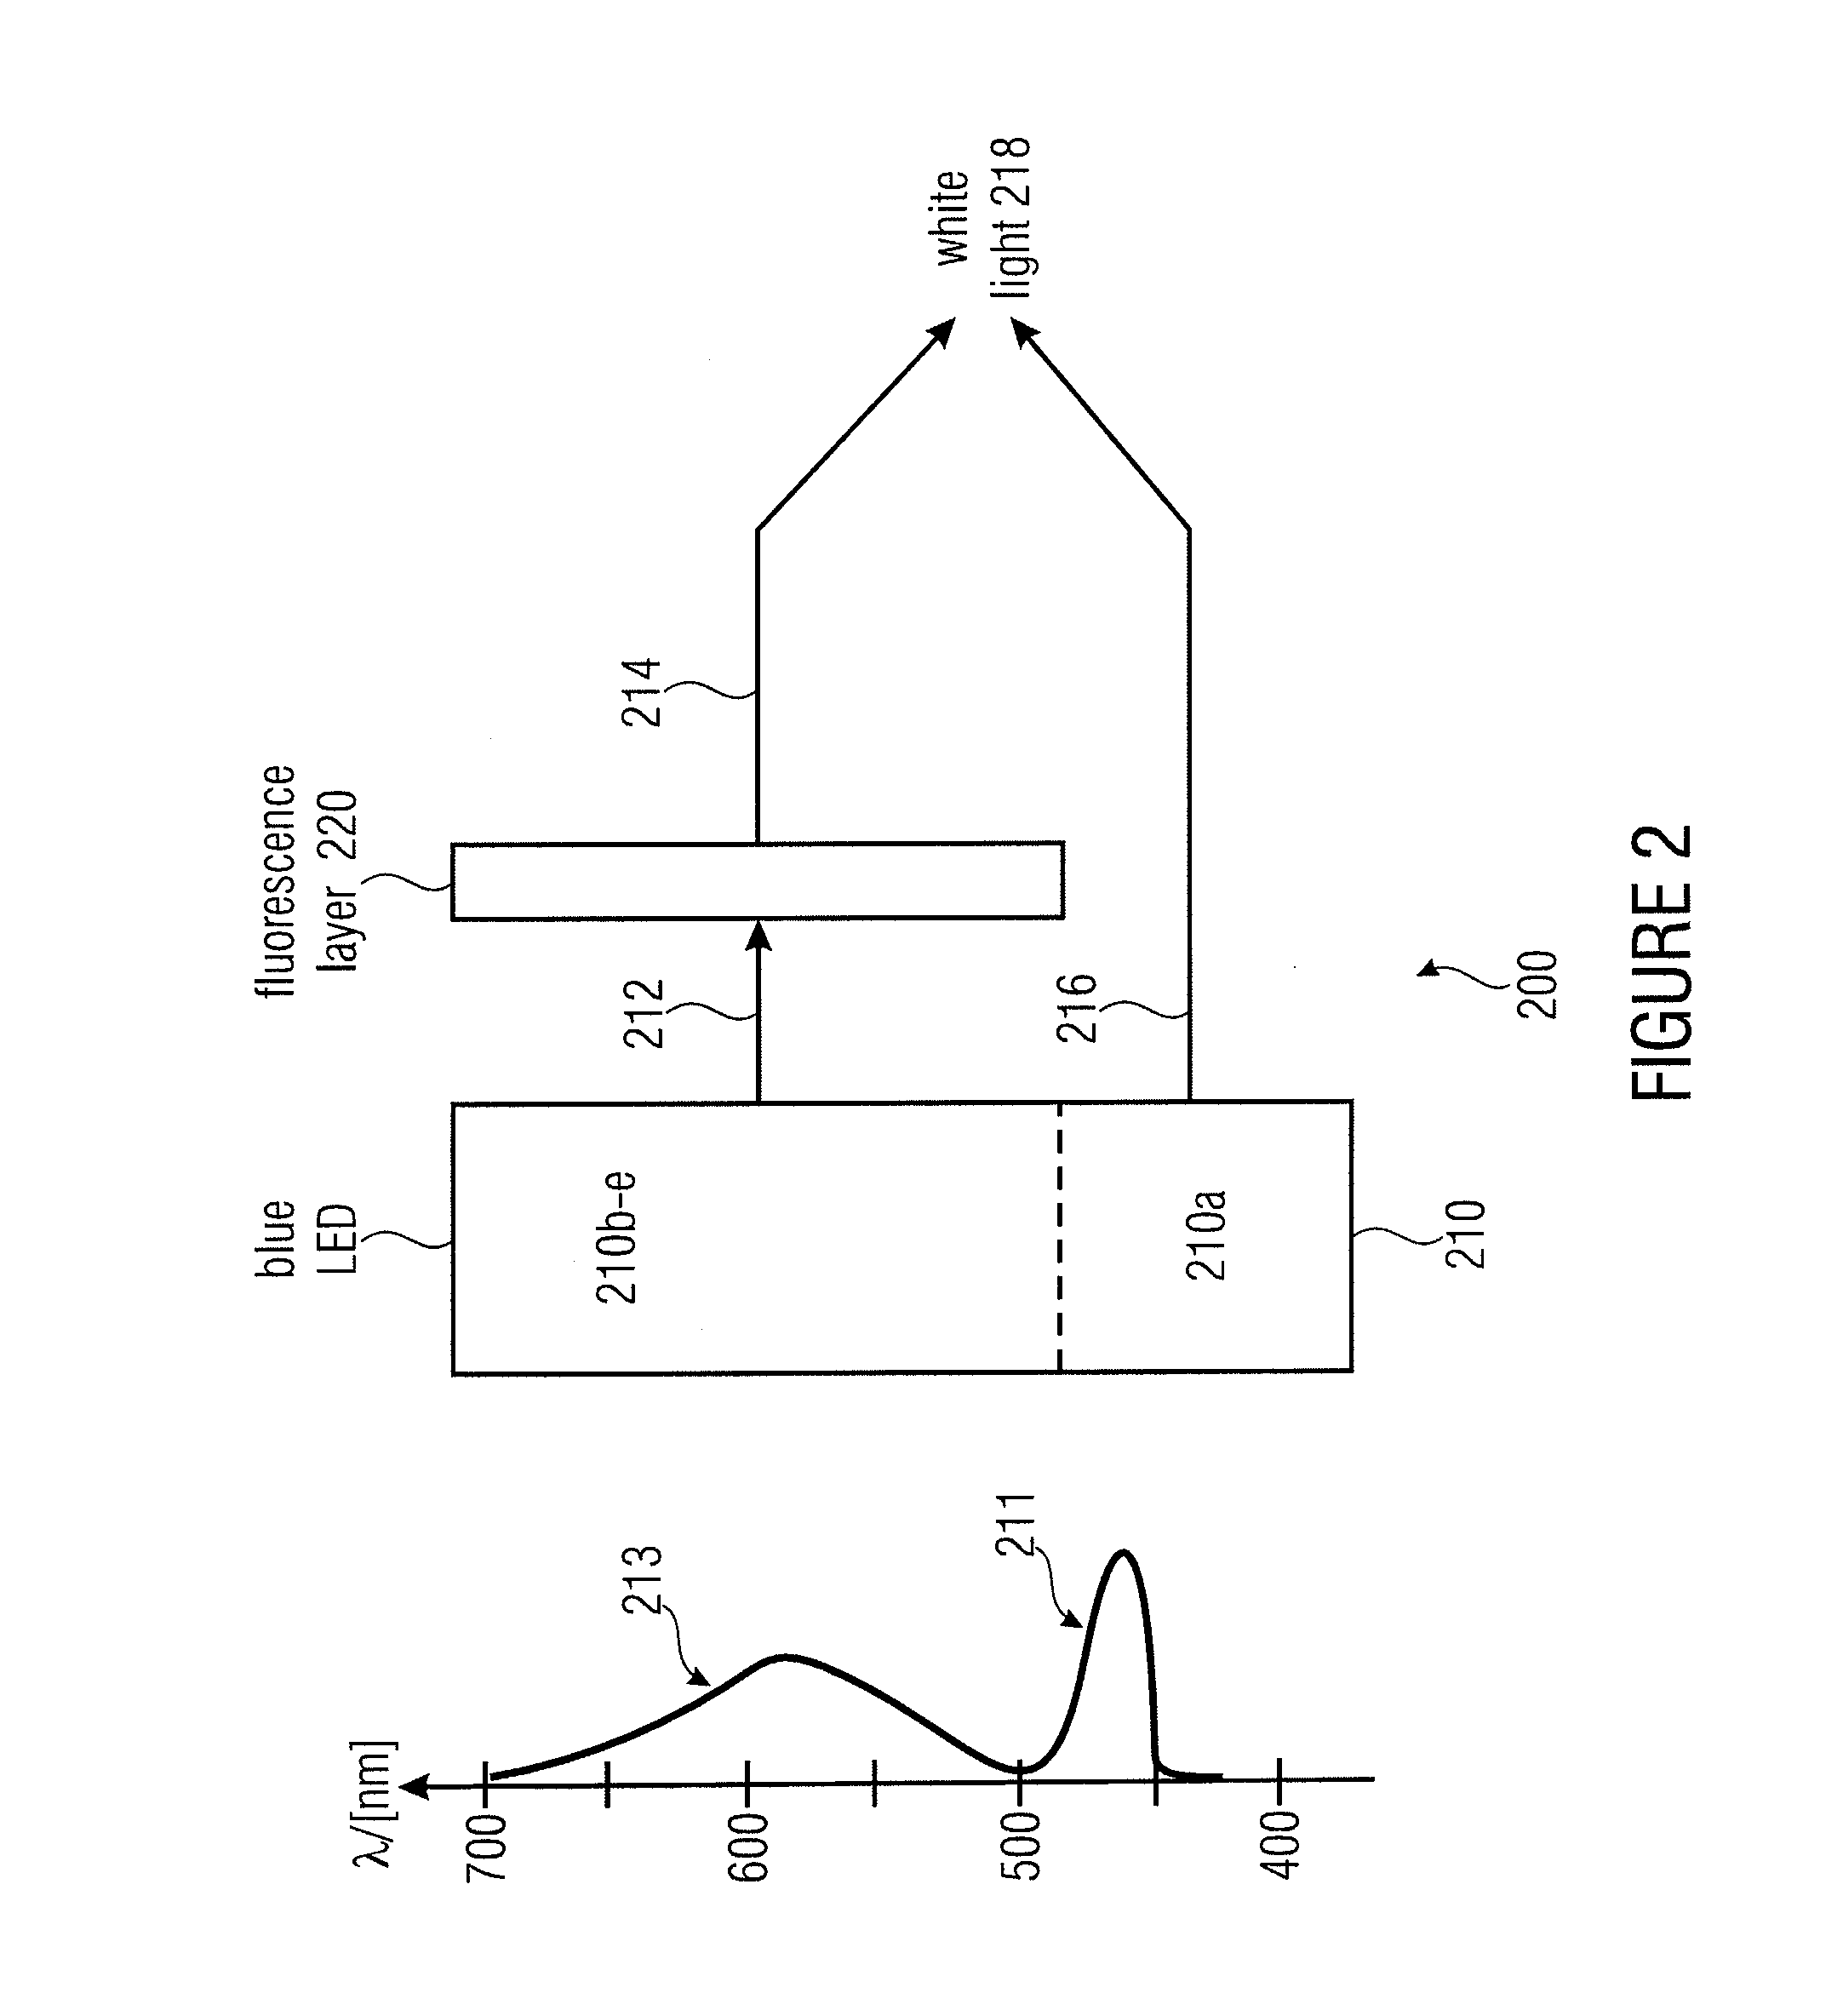 System and method for determining a position of a movable object, arrangement of general lighting LED and light sensor for a position determination of a movable object